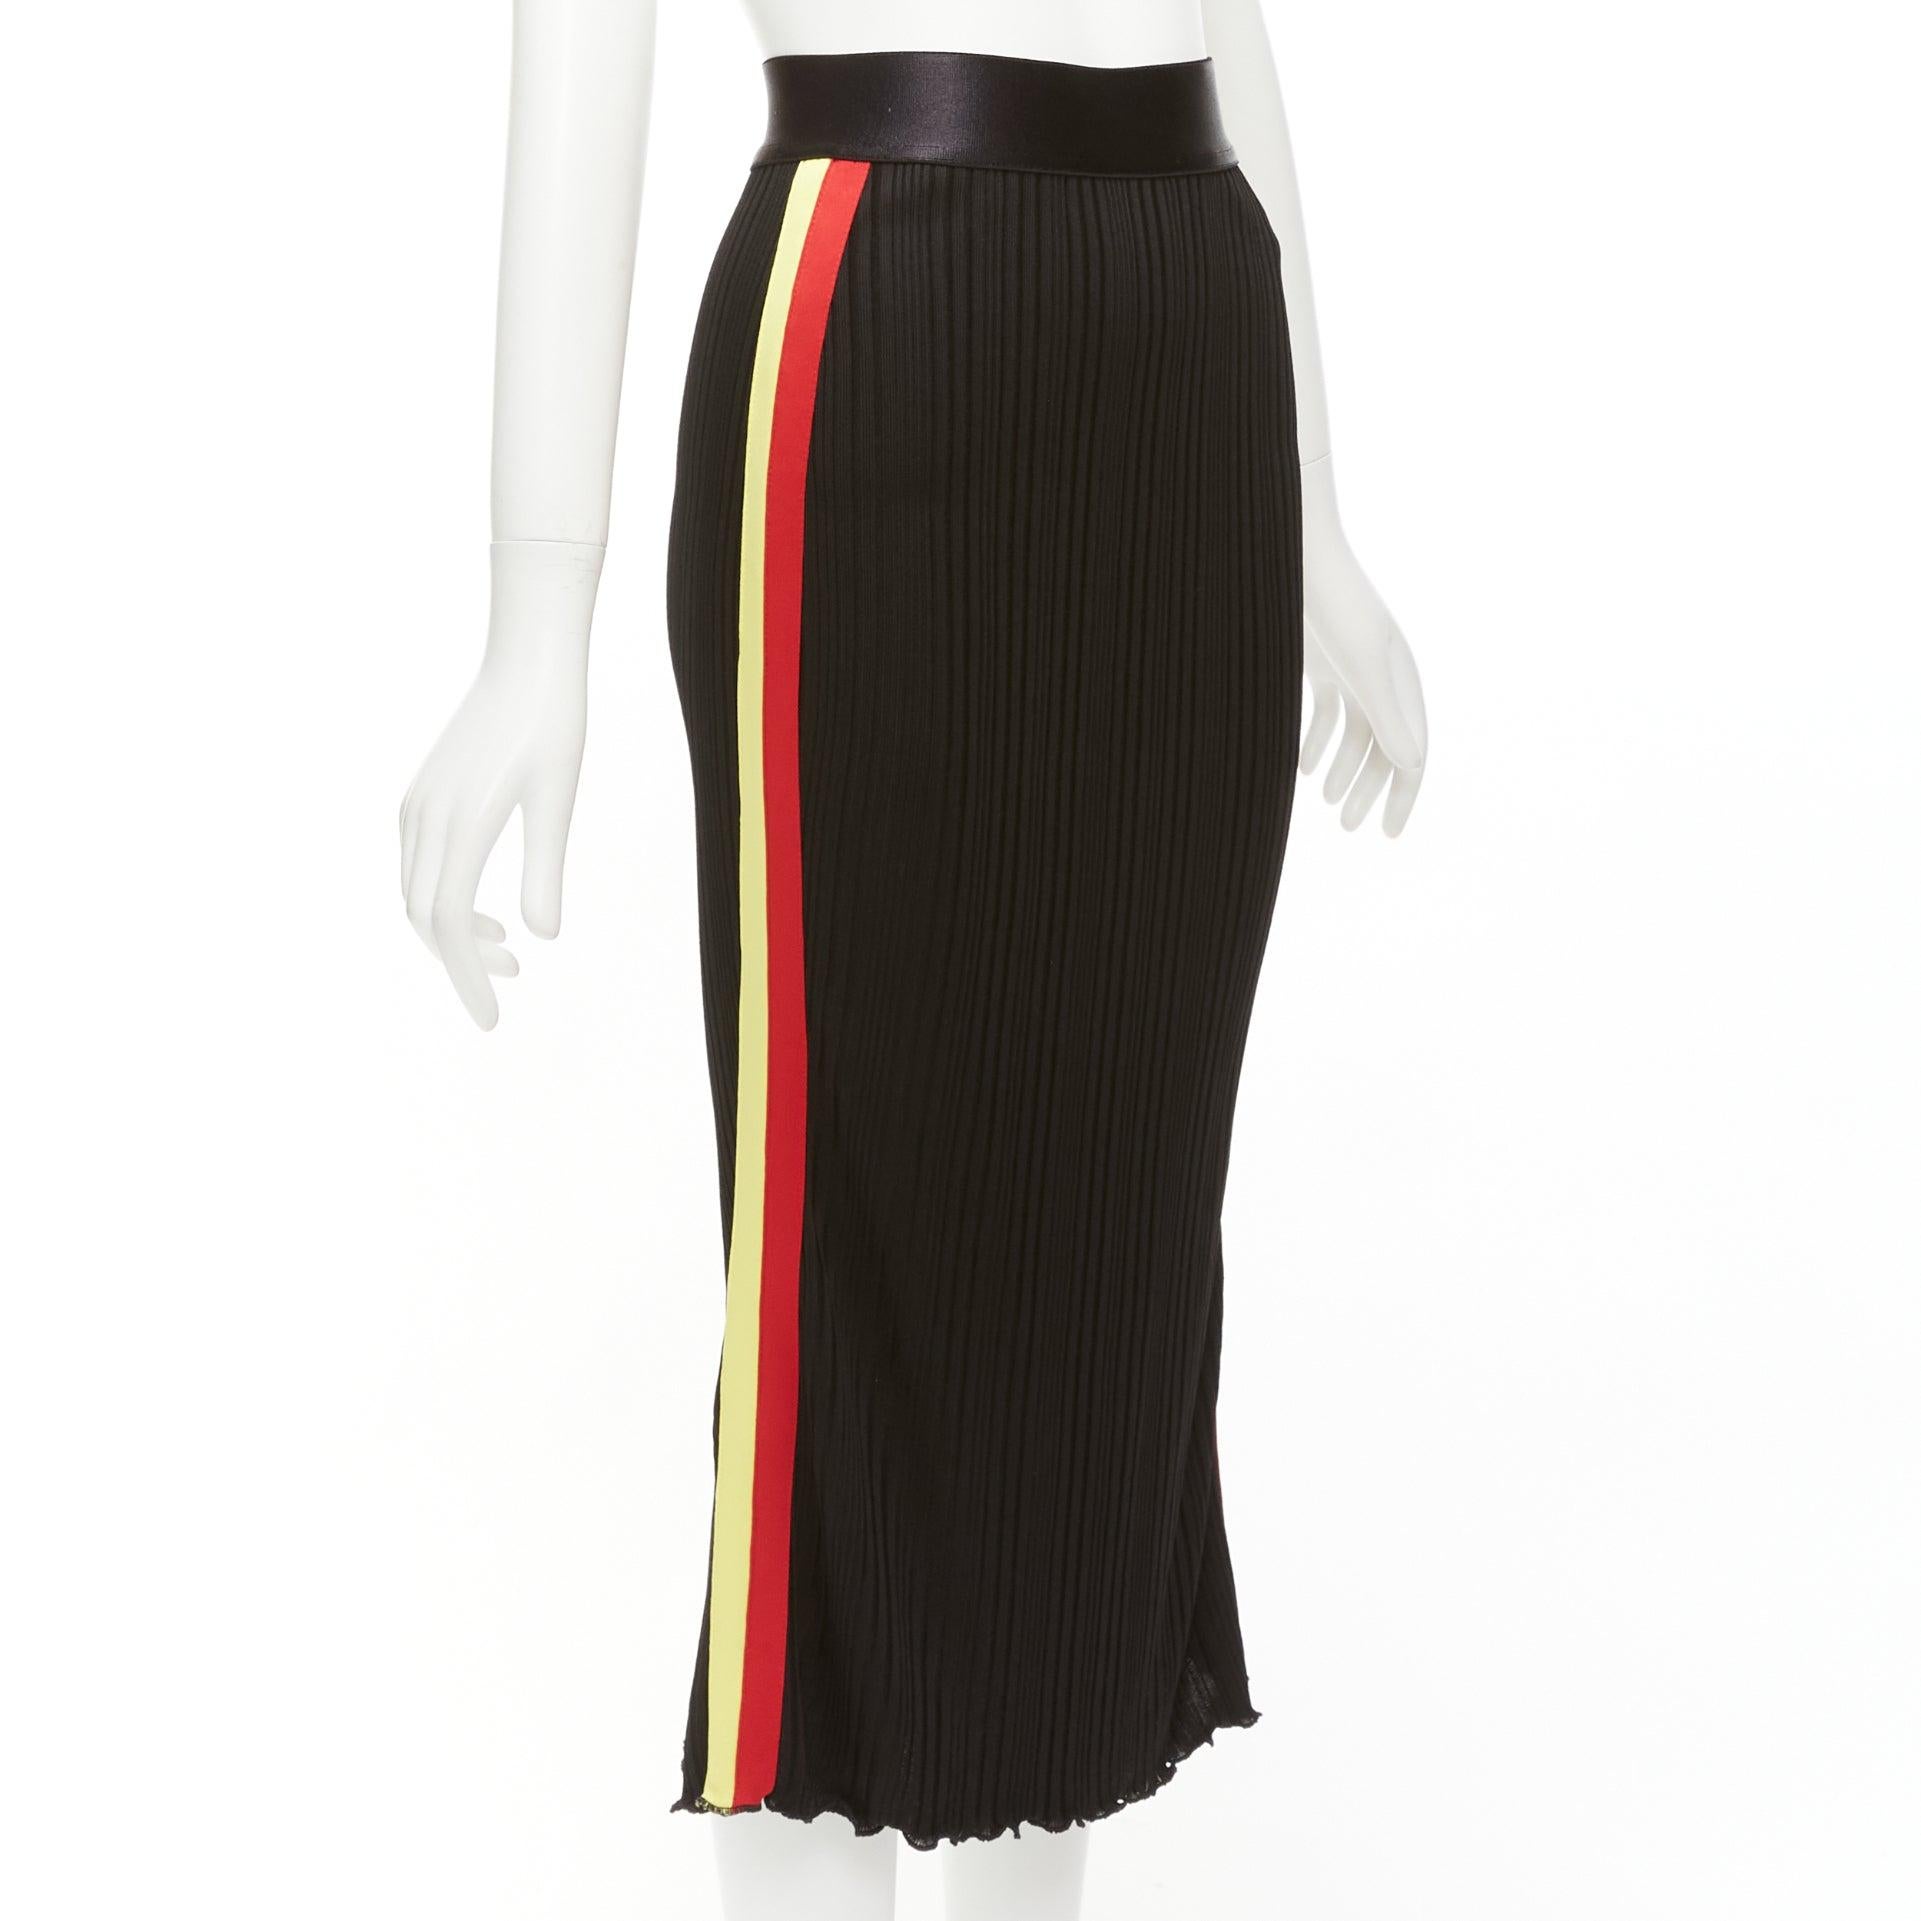 ELLERY black viscose yellow red tape ribbed high waist pleated flute skirt UK6 XS
Reference: YIKK/A00070
Brand: Ellery
Material: Viscose, Blend
Color: Black, Red
Pattern: Striped
Closure: Elasticated
Made in: Australia

CONDITION:
Condition: